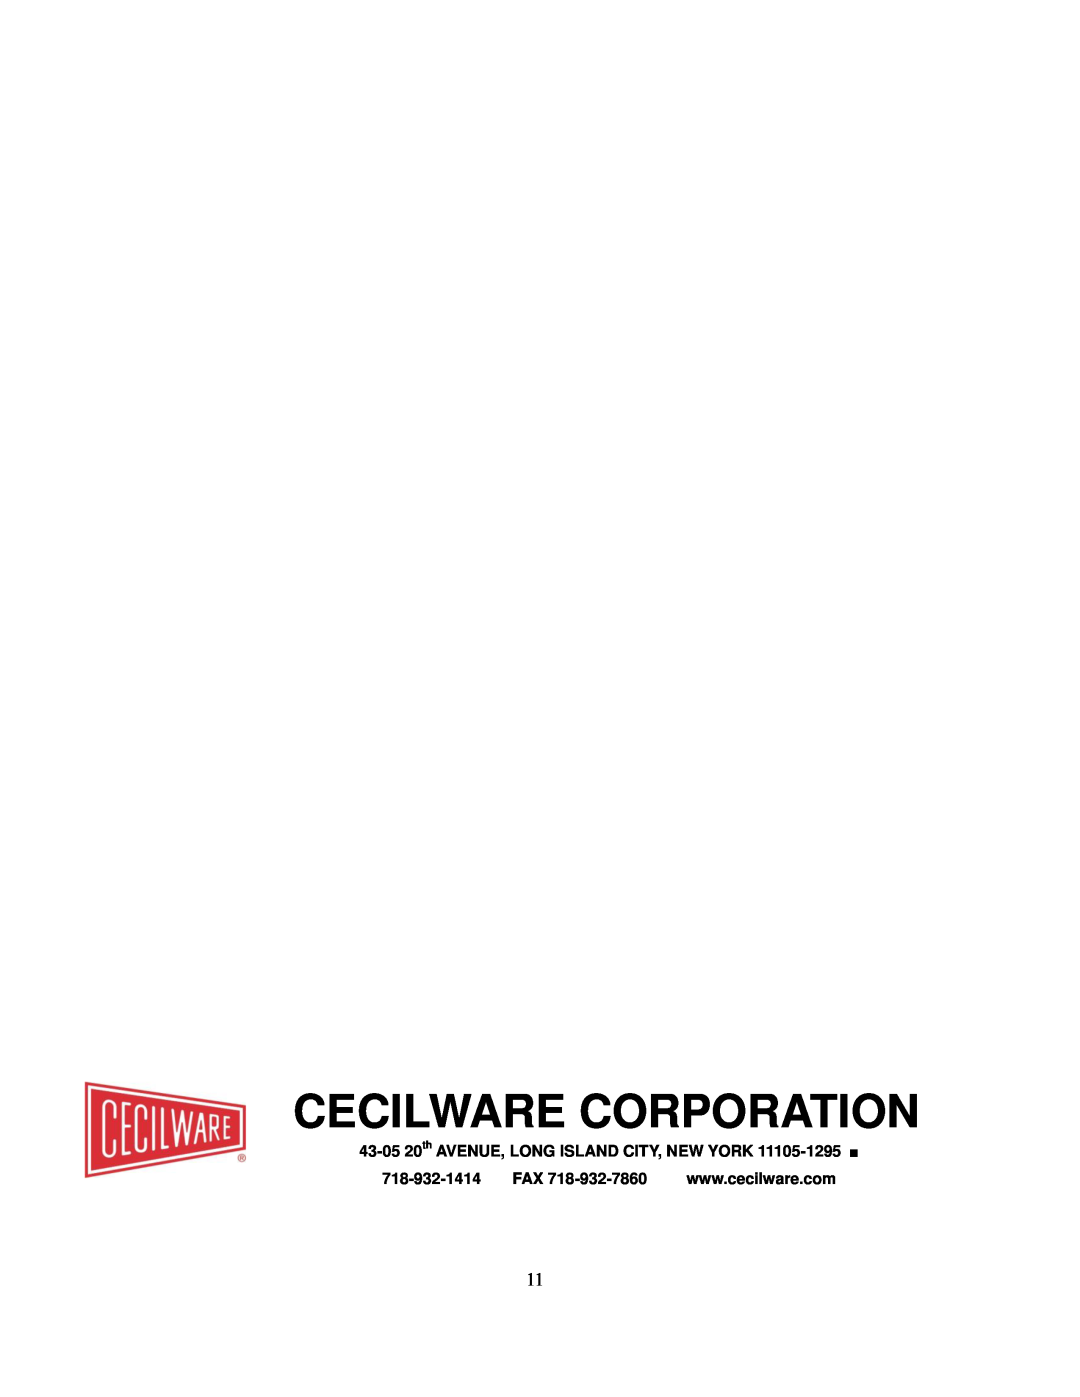 Cecilware CT-250, CT-500, CT-750 operation manual Cecilware Corporation, 43-0520th AVENUE, LONG ISLAND CITY, NEW YORK 